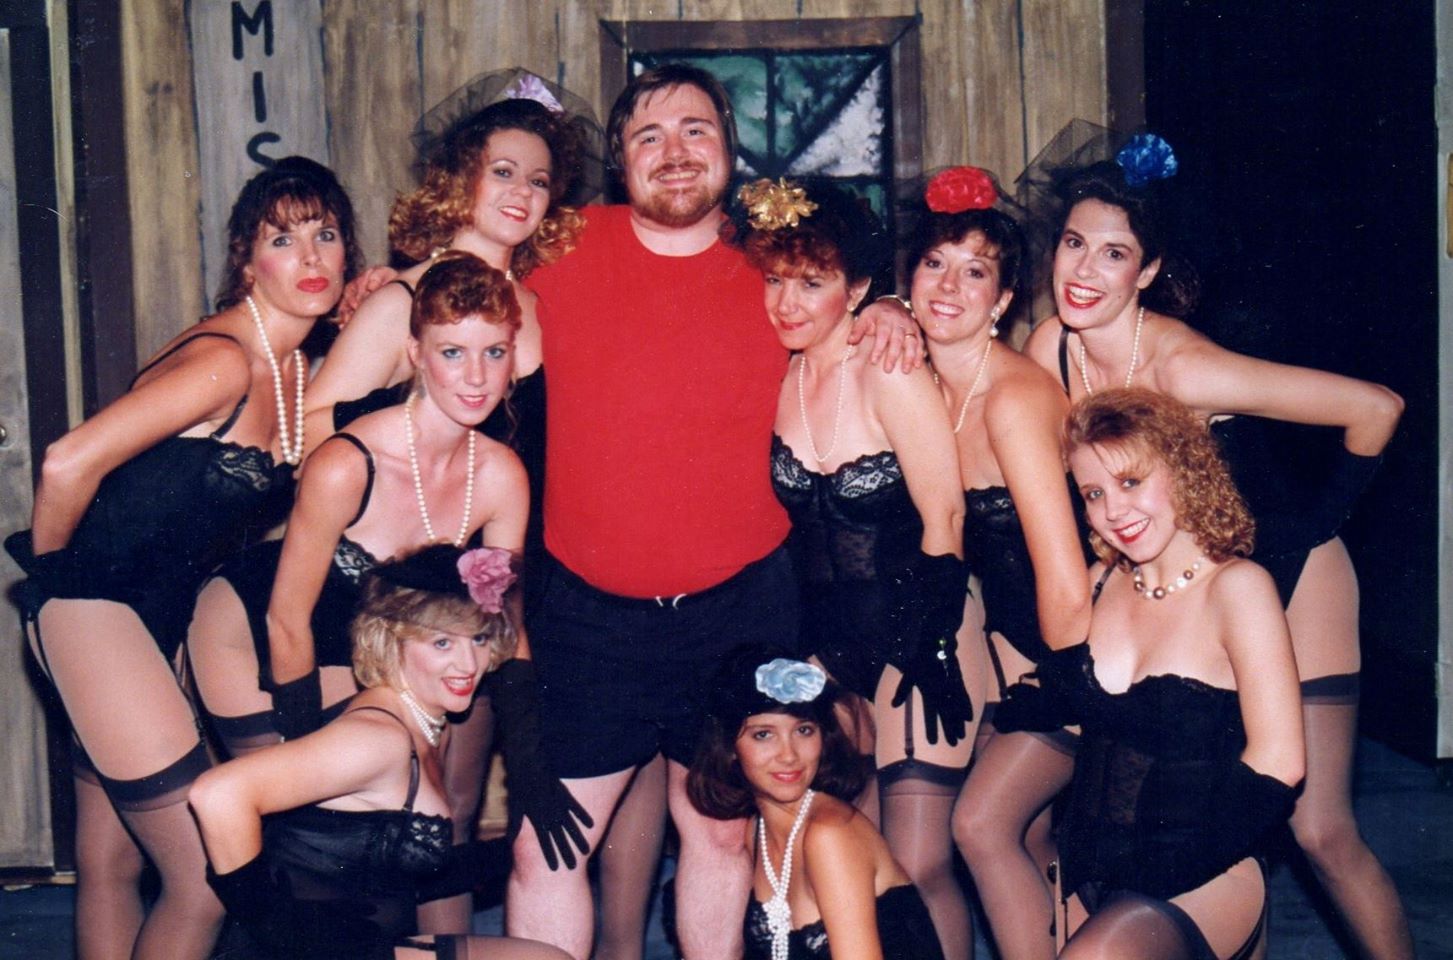 Guys and Dolls at Theater Works in 1990. Among those pictured, Robyn Allen, Wes Martin, Christine Lone, Tj Ronayne, Shawnna Pomeroy, Maryann Martin and Lauren Schieffer. (Photo credit unknown)